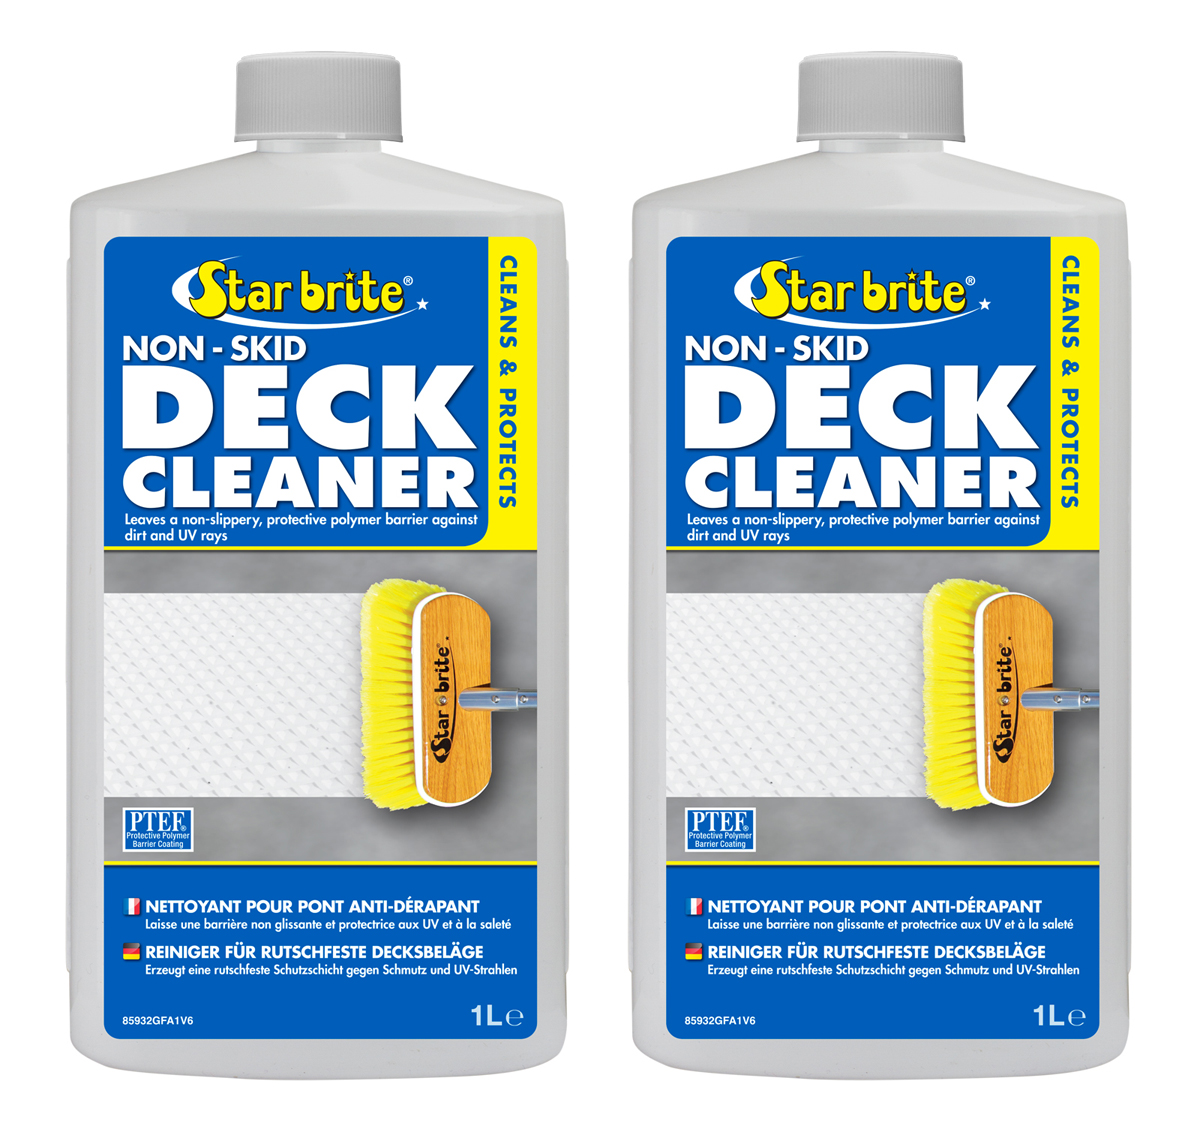 Star Brite Non-Skid Deck Cleaner With PTEF - Pack of 2